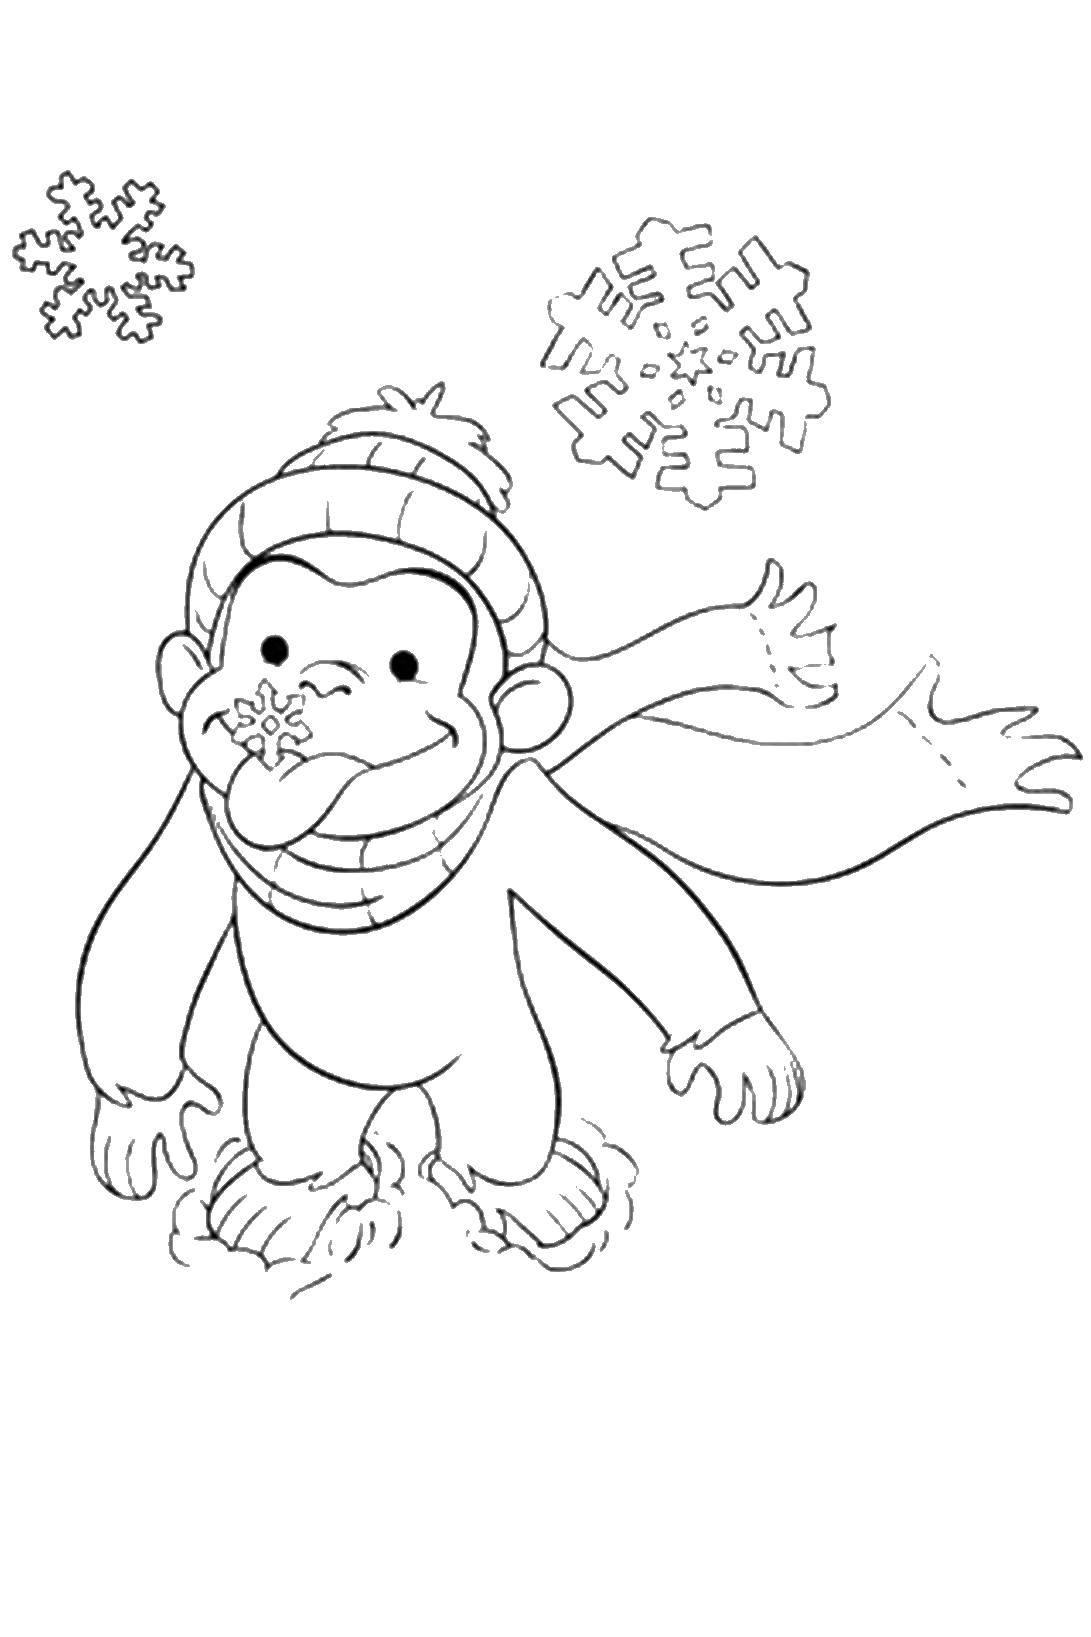 Coloring Monkey in winter. Category winter. Tags:  winter, snow, monkey.